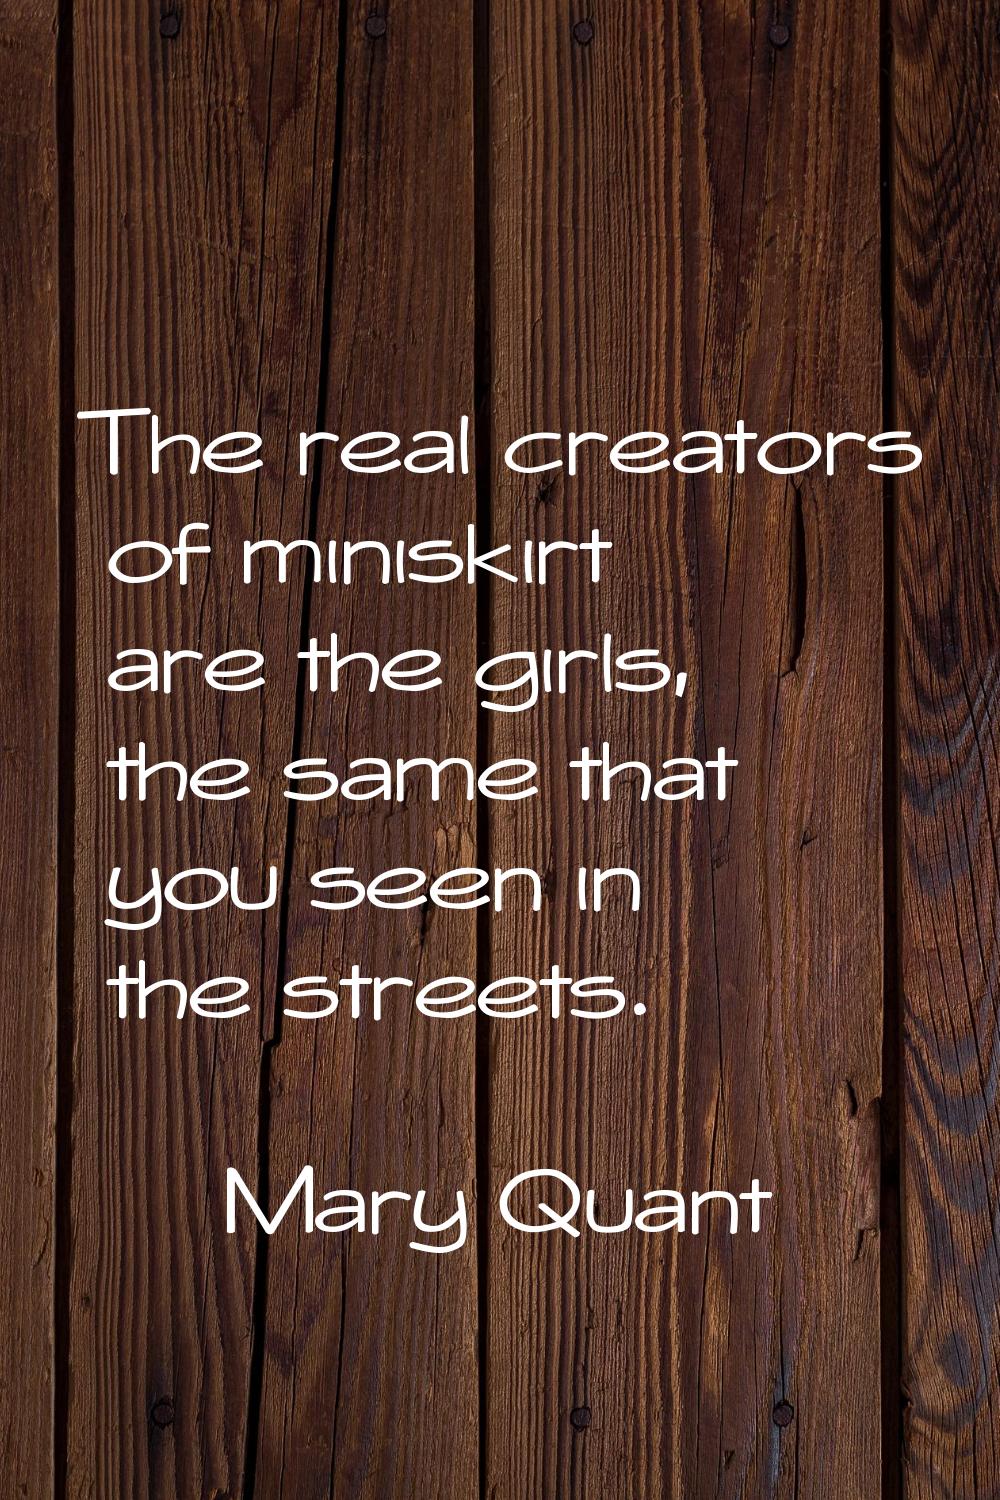 The real creators of miniskirt are the girls, the same that you seen in the streets.